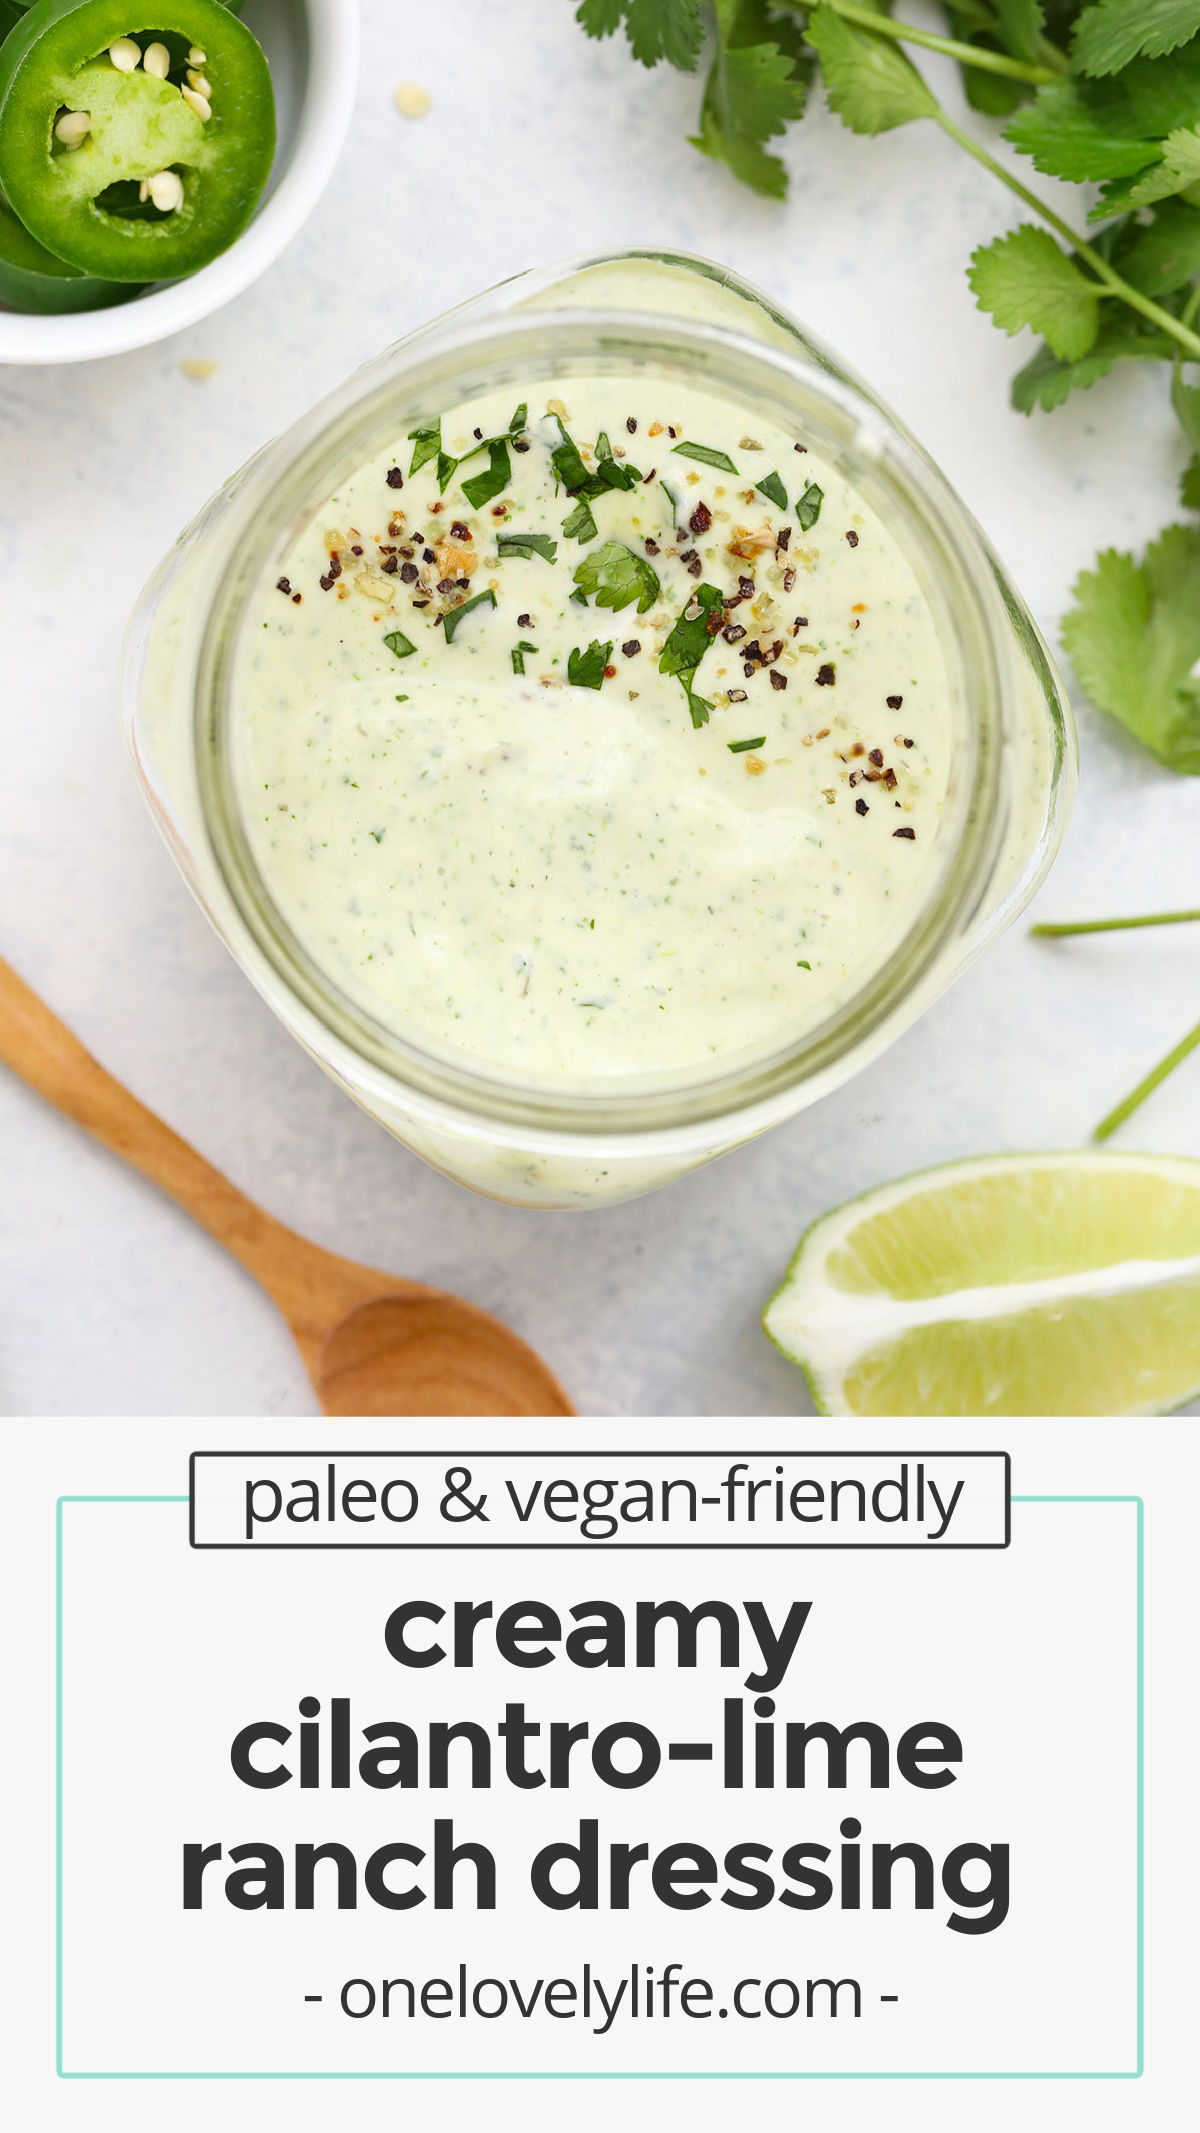 Cilantro Lime Ranch Dressing - This bright, fresh Tex-Mex ranch is perfect over tacos, burrito bowls, salads, or veggies. It makes a DELICIOUS dip or dressing! (Vegan & Paleo friendly!) // paleo ranch // vegan ranch // whole30 ranch // cafe rio ranch // costa vida ranch // cilantro ranch // creamy cilantro dressing // fish taco sauce